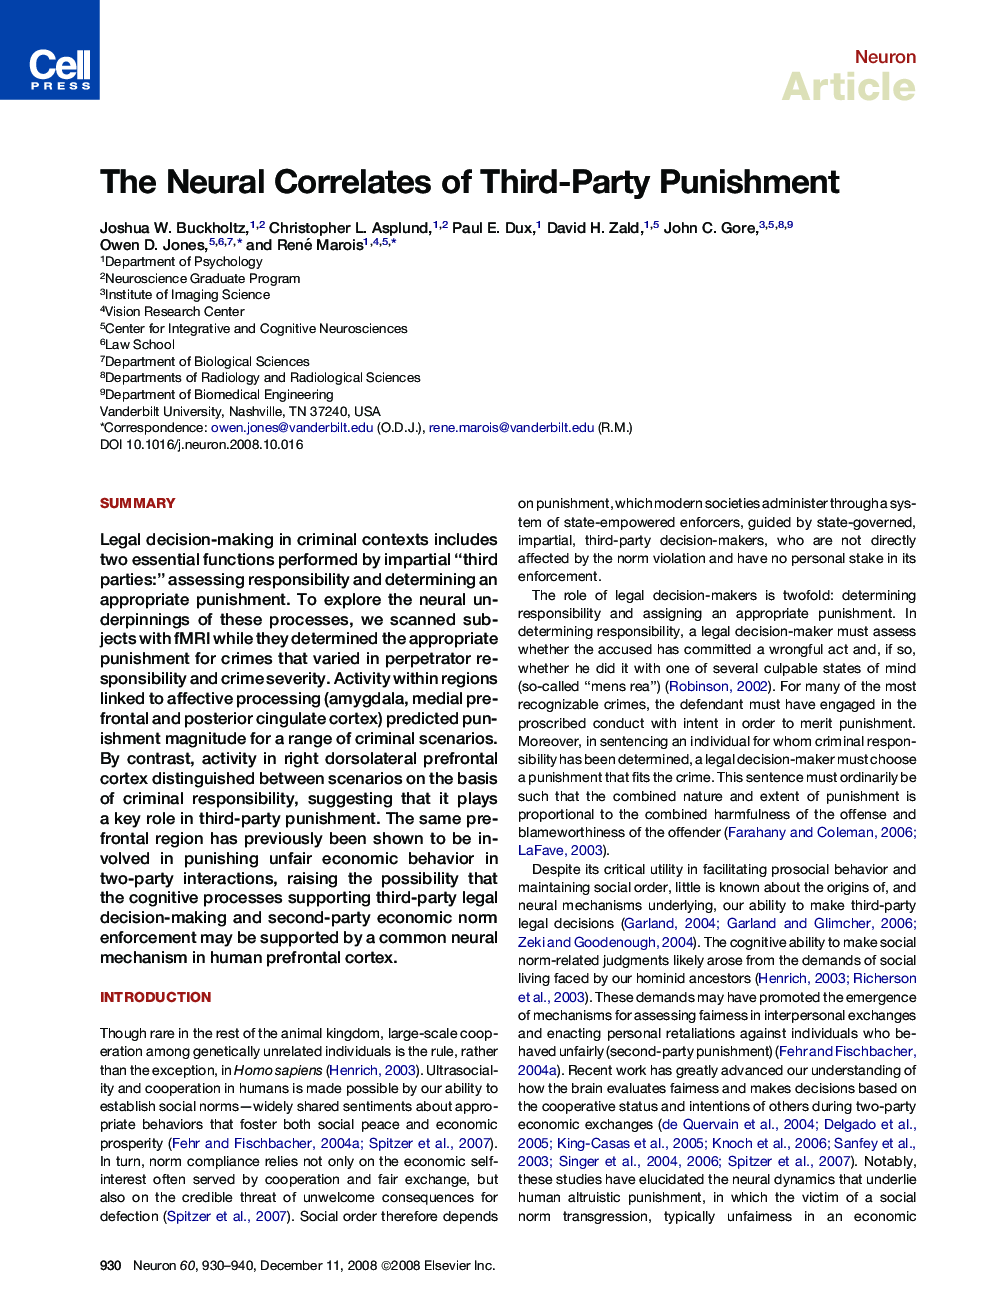 The Neural Correlates of Third-Party Punishment